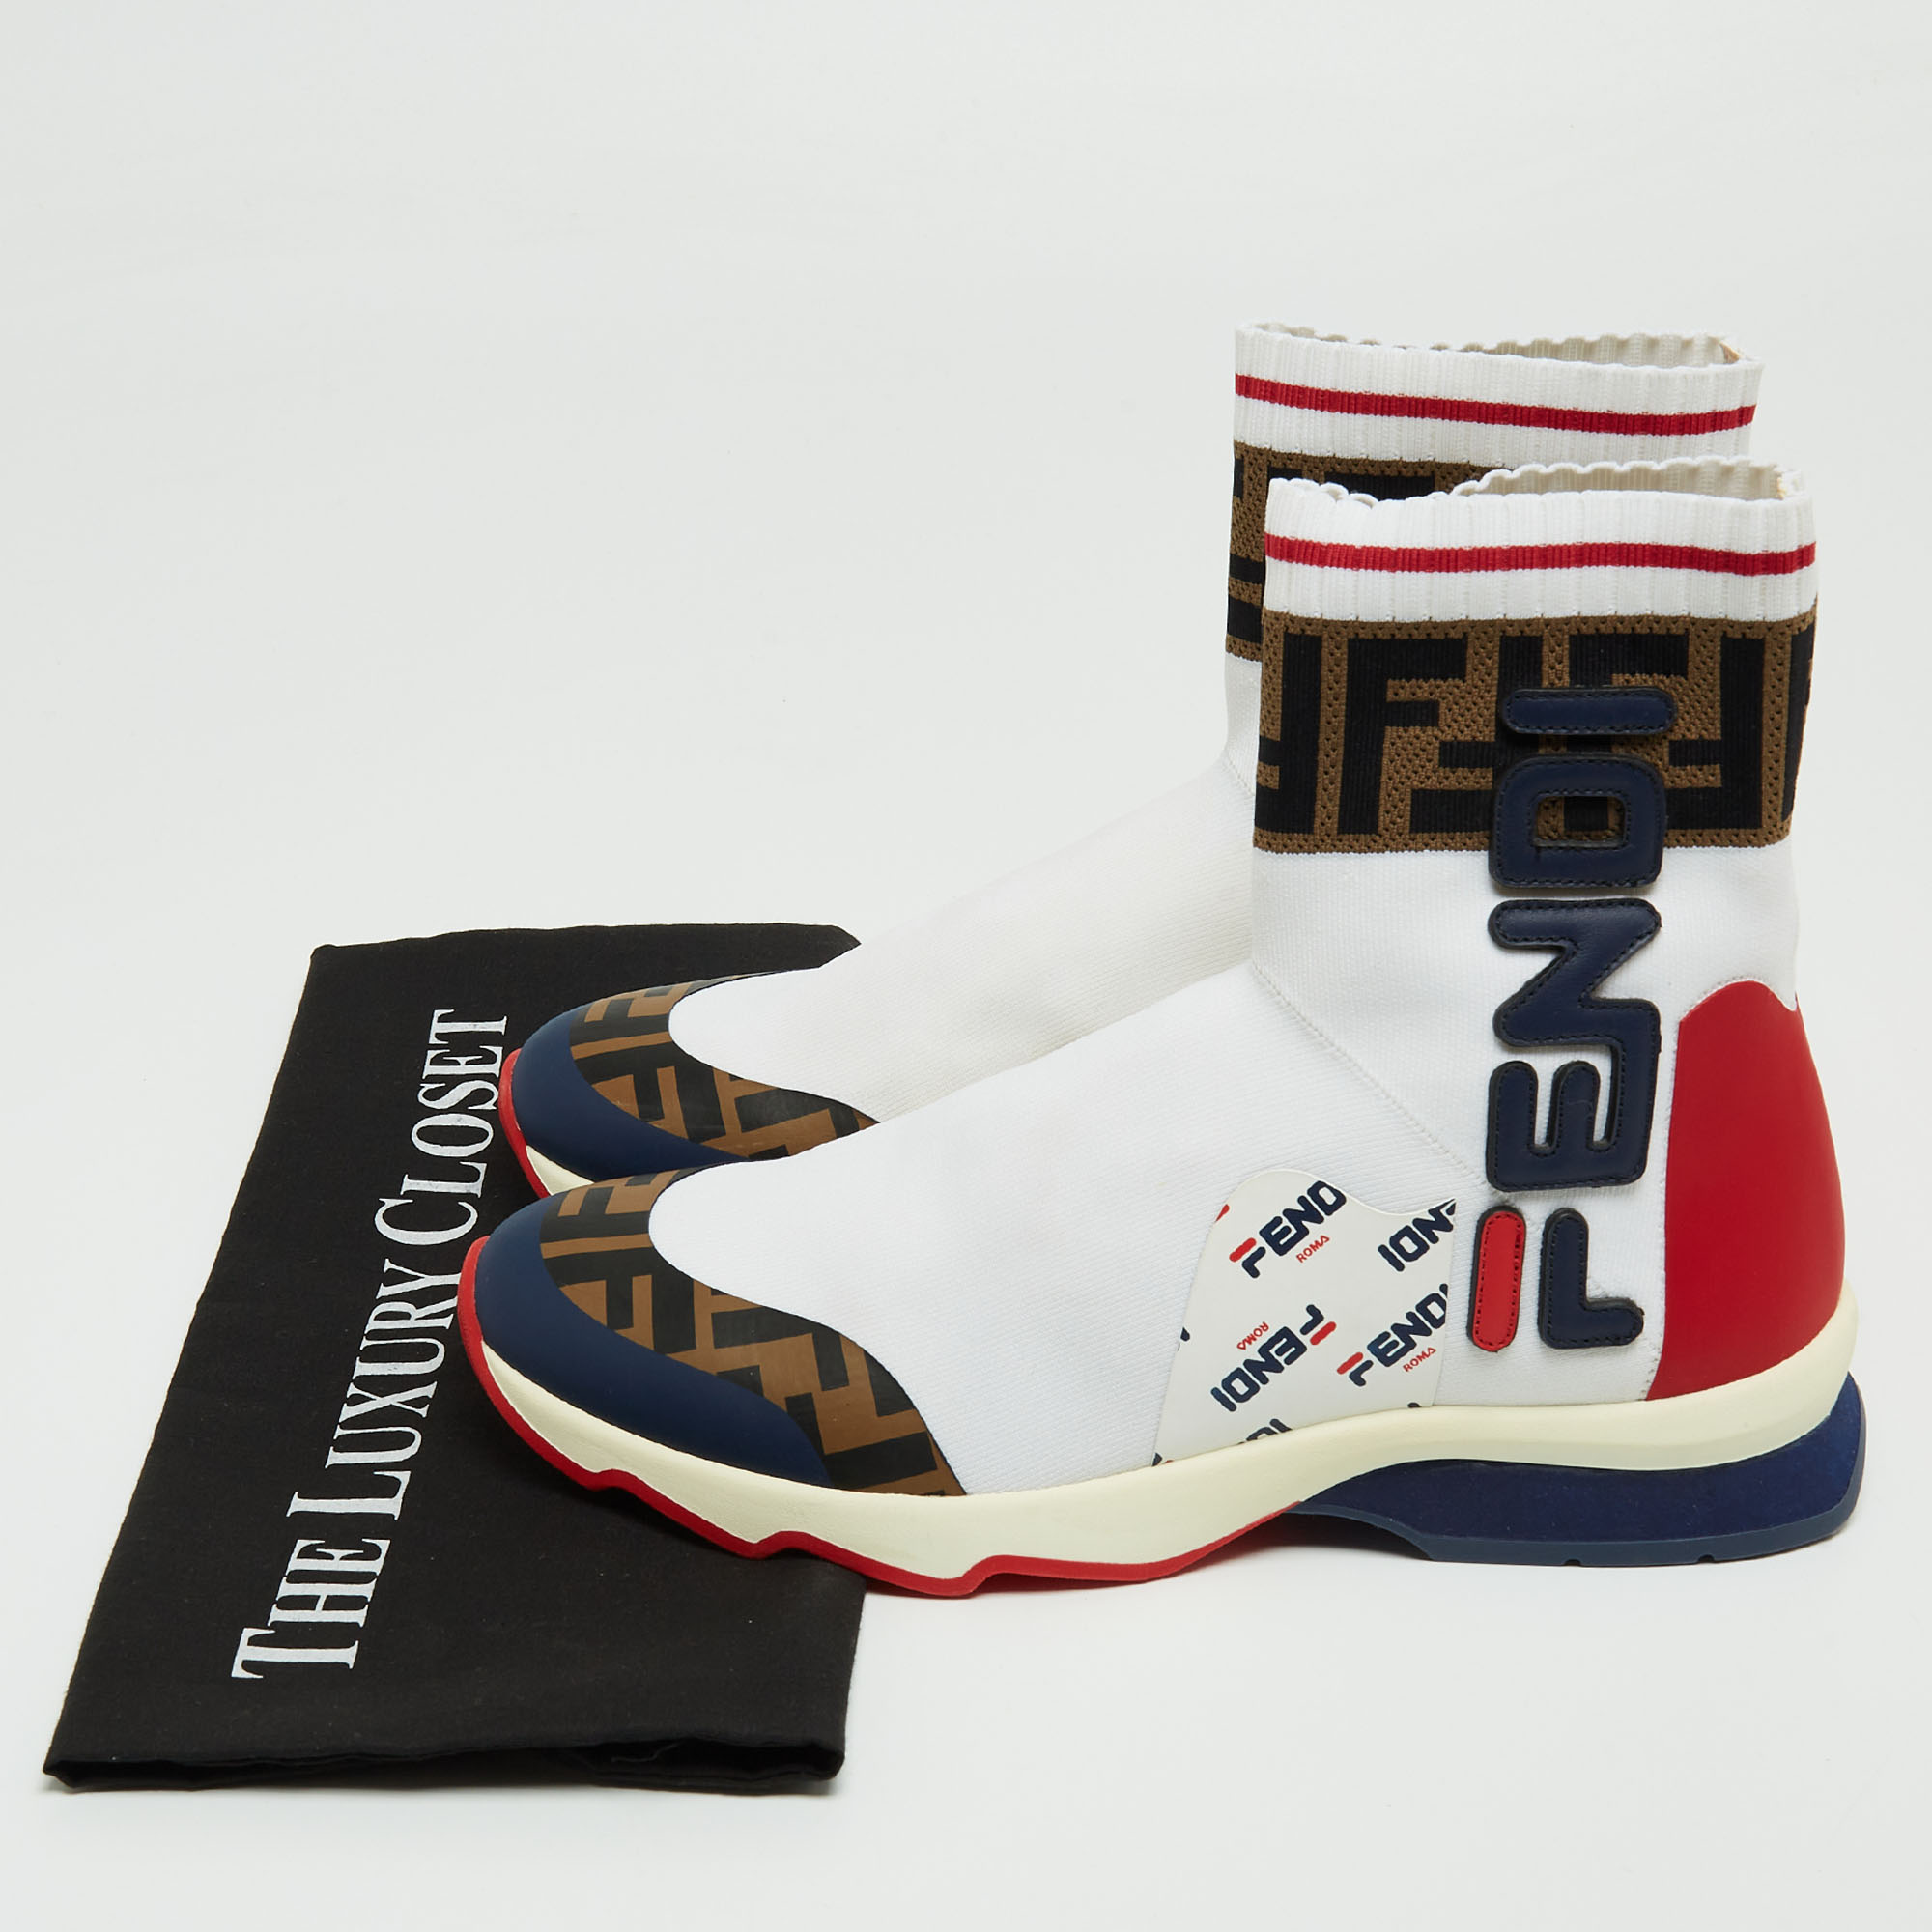 Fendi X Fila Tricolor Knit Fabric And Leather Mania Sock Sneakers Size 38